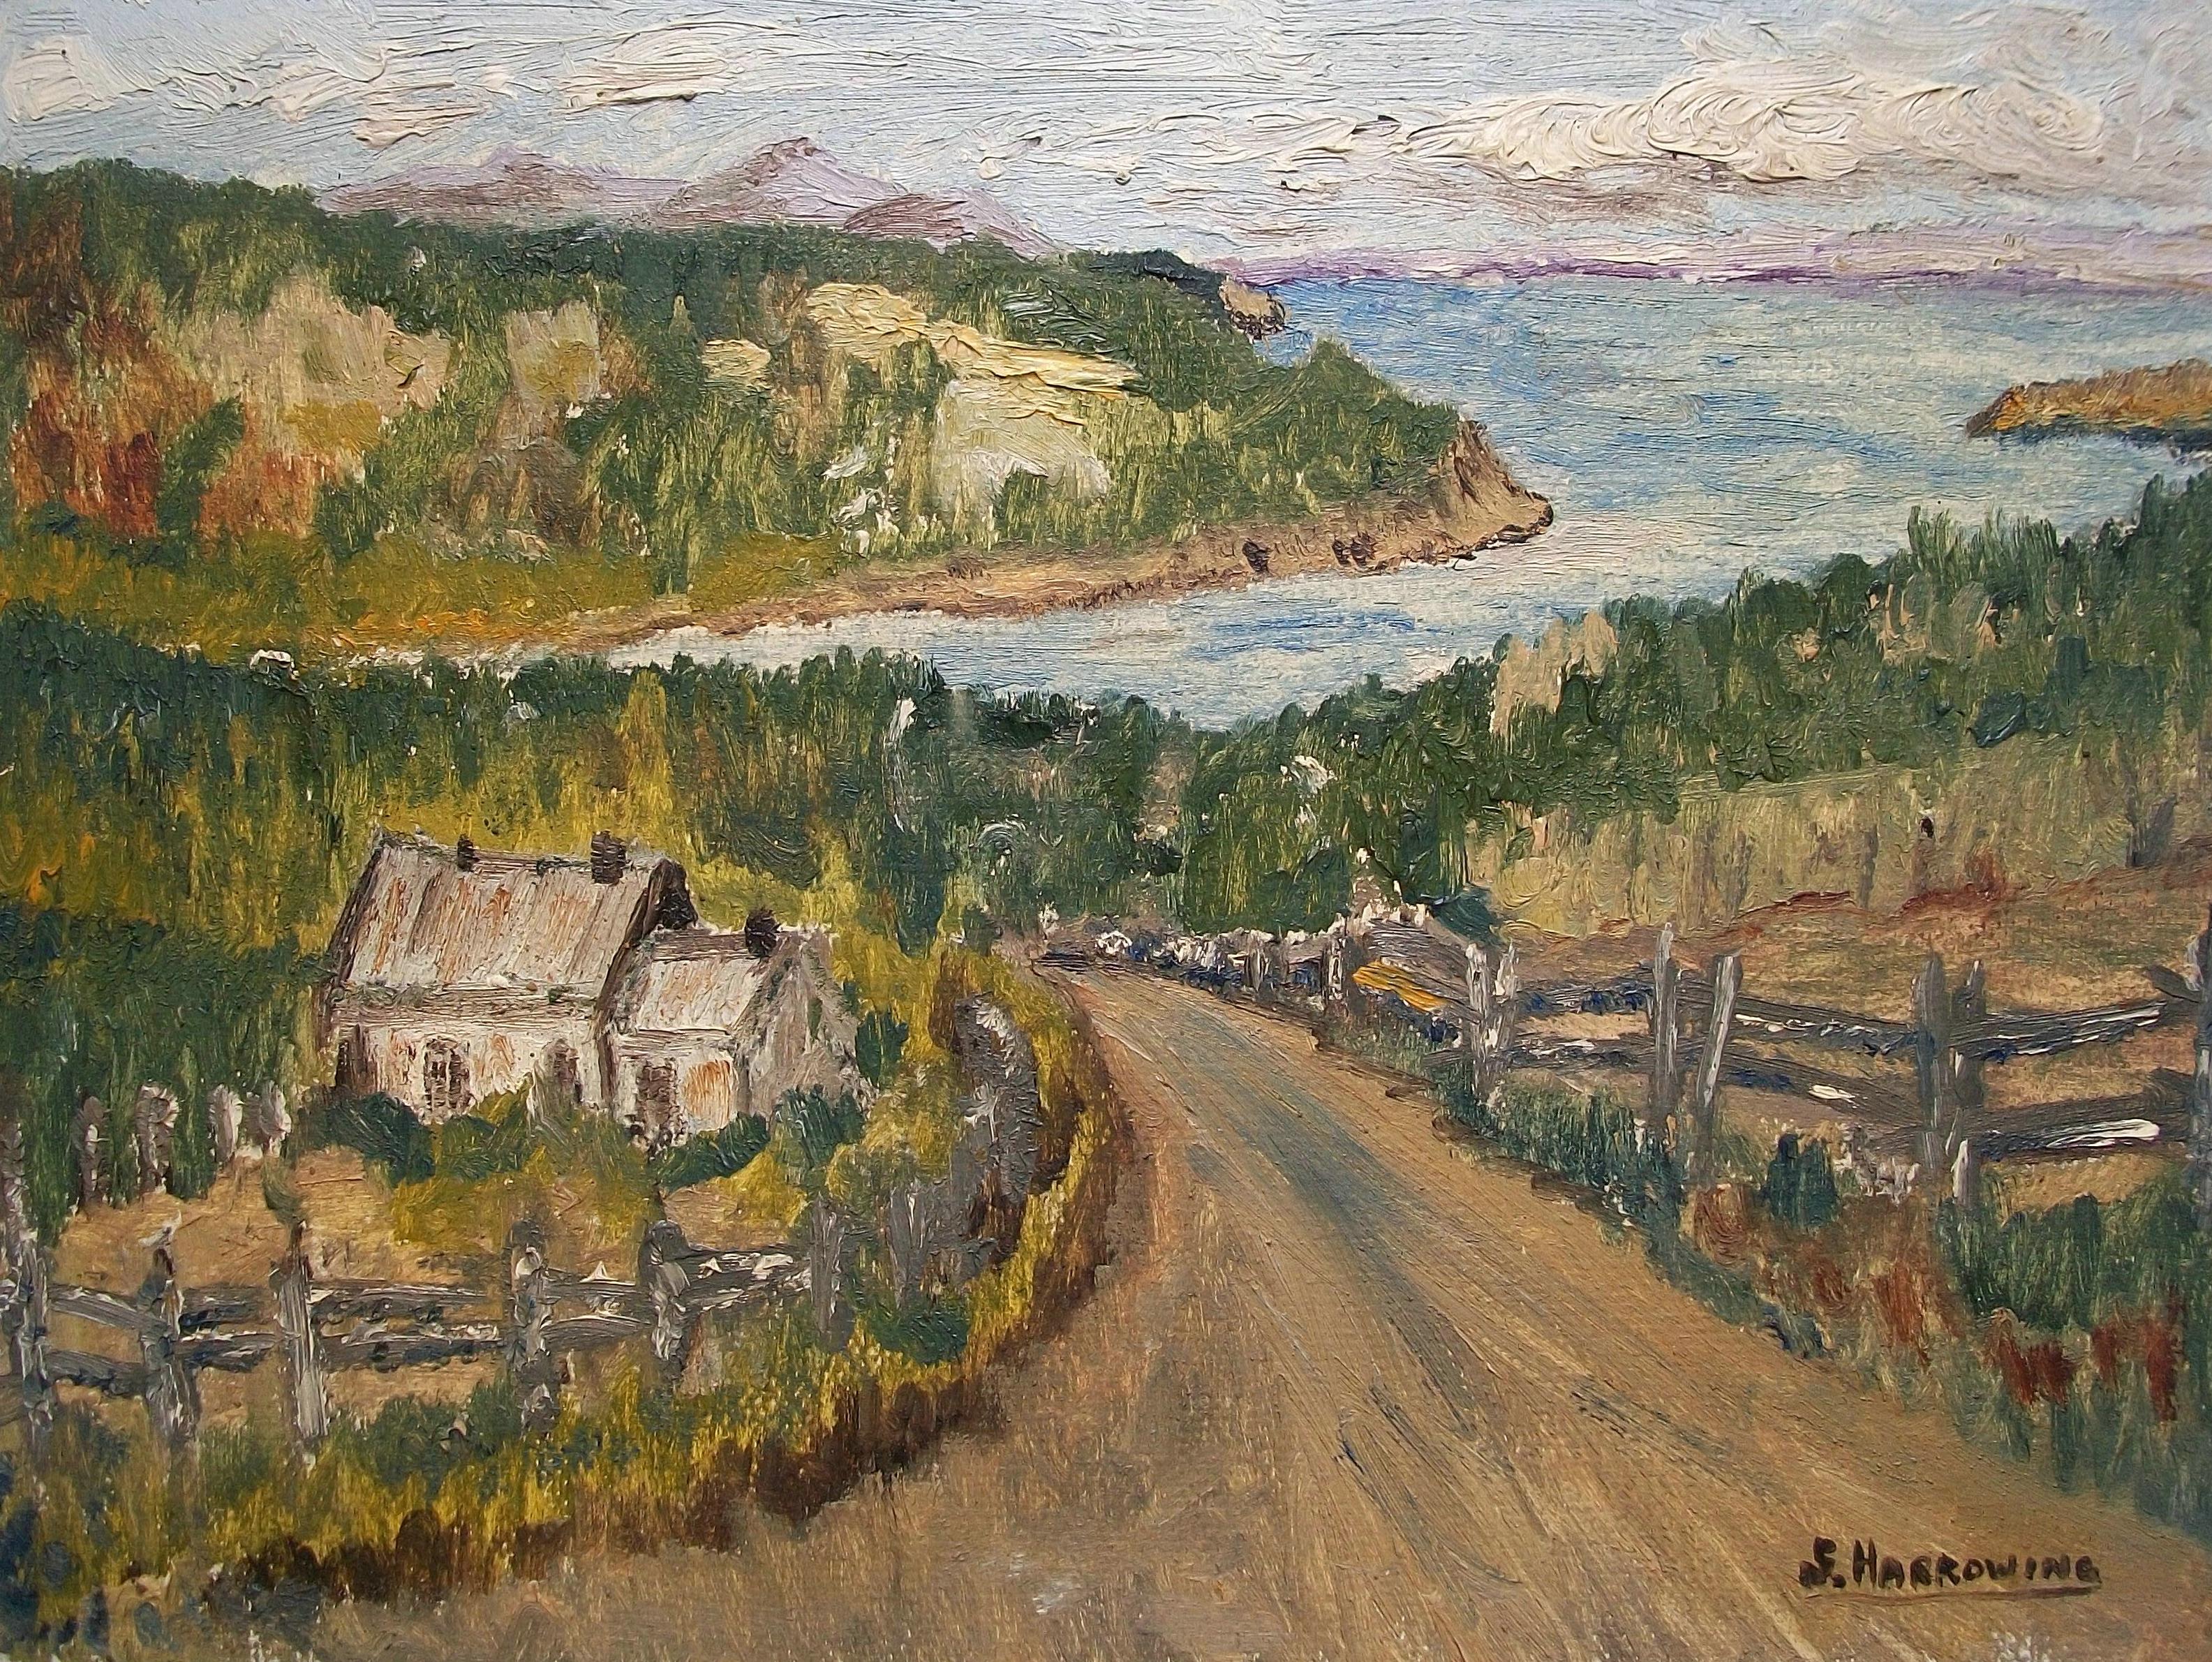 Expressionist S. HARROWING - 'Baie St. Paul, Que.' - Landscape Oil Painting - Canada - C. 1962 For Sale